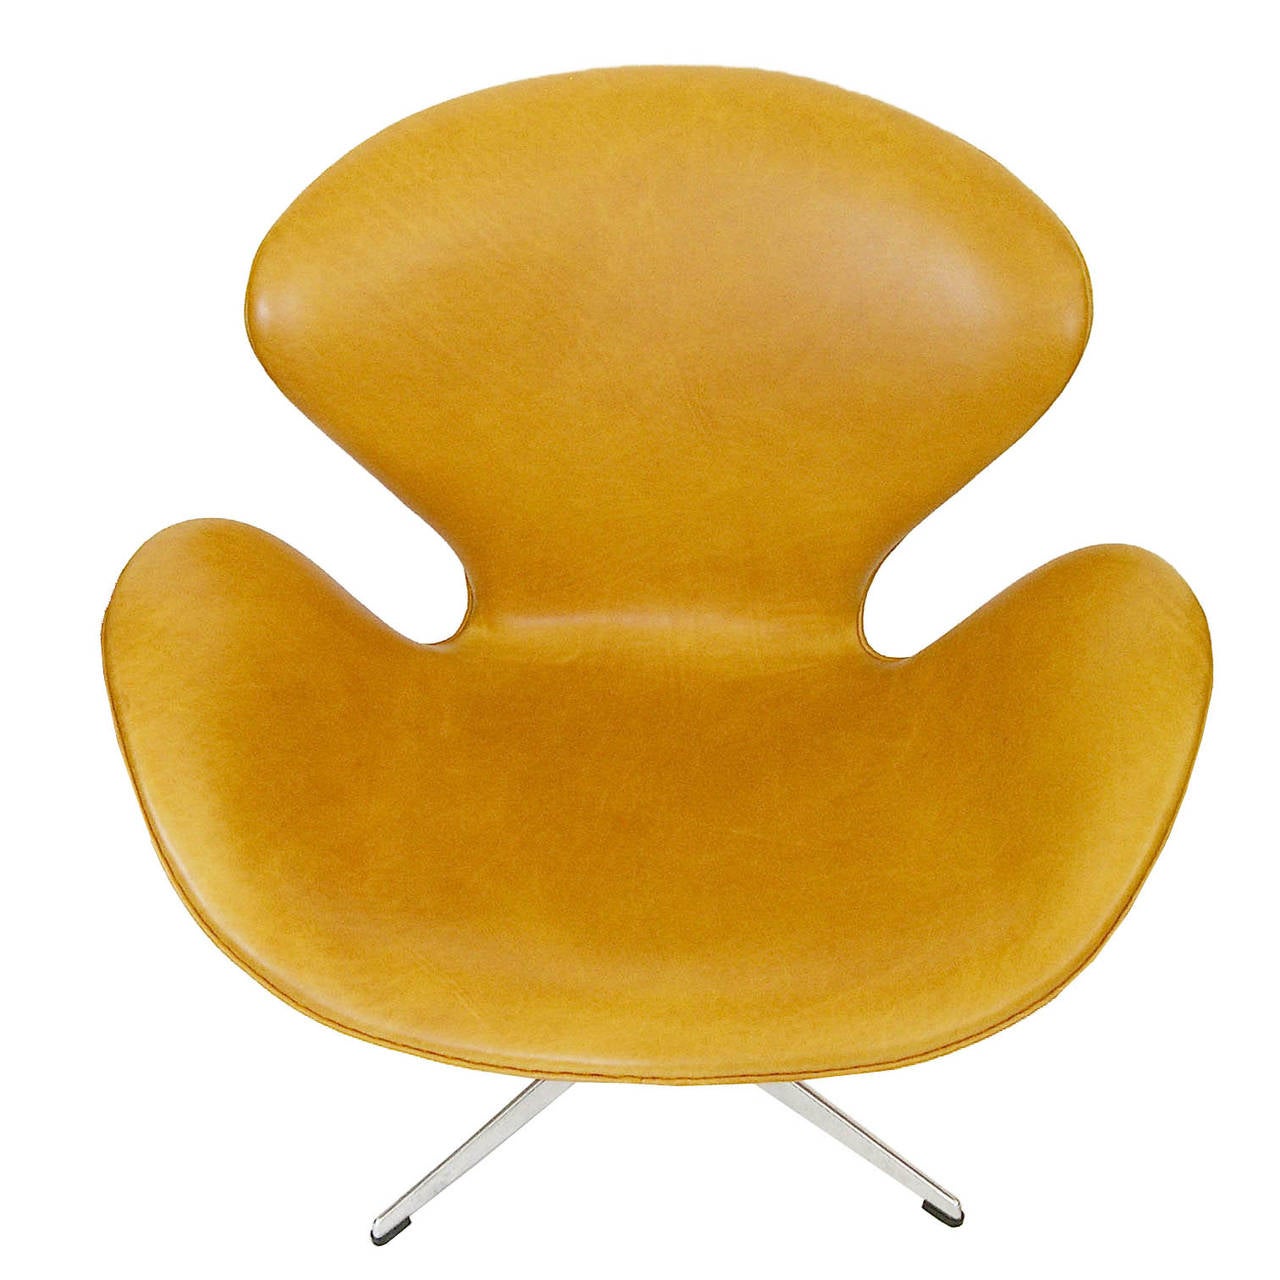 These original swan chairs are covered in beautiful saddle tan color leather. They are in great original condition and swivel freely. They retain their original Fritz Hansen labels. They also have the Fritz Hansen logo and 